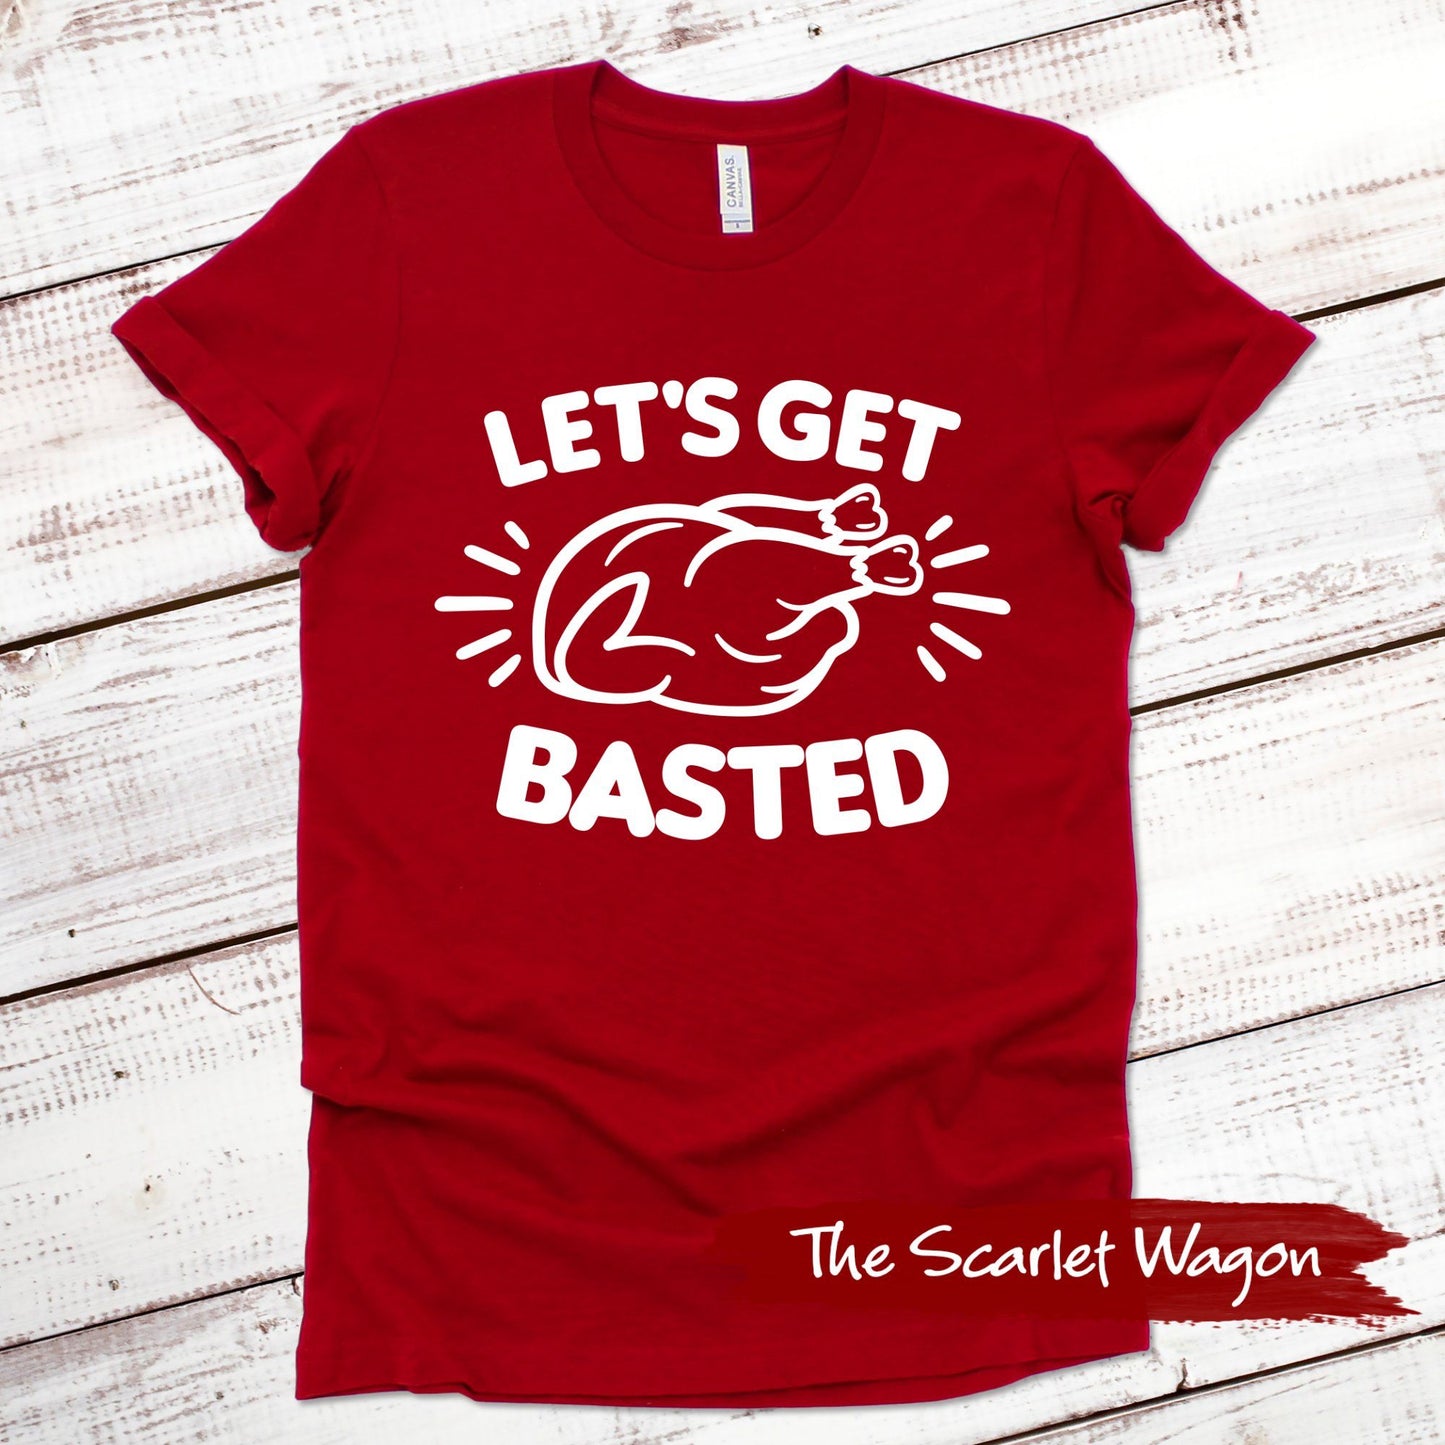 Let's Get Basted Thanksgiving Shirt Scarlet Wagon Red XS 